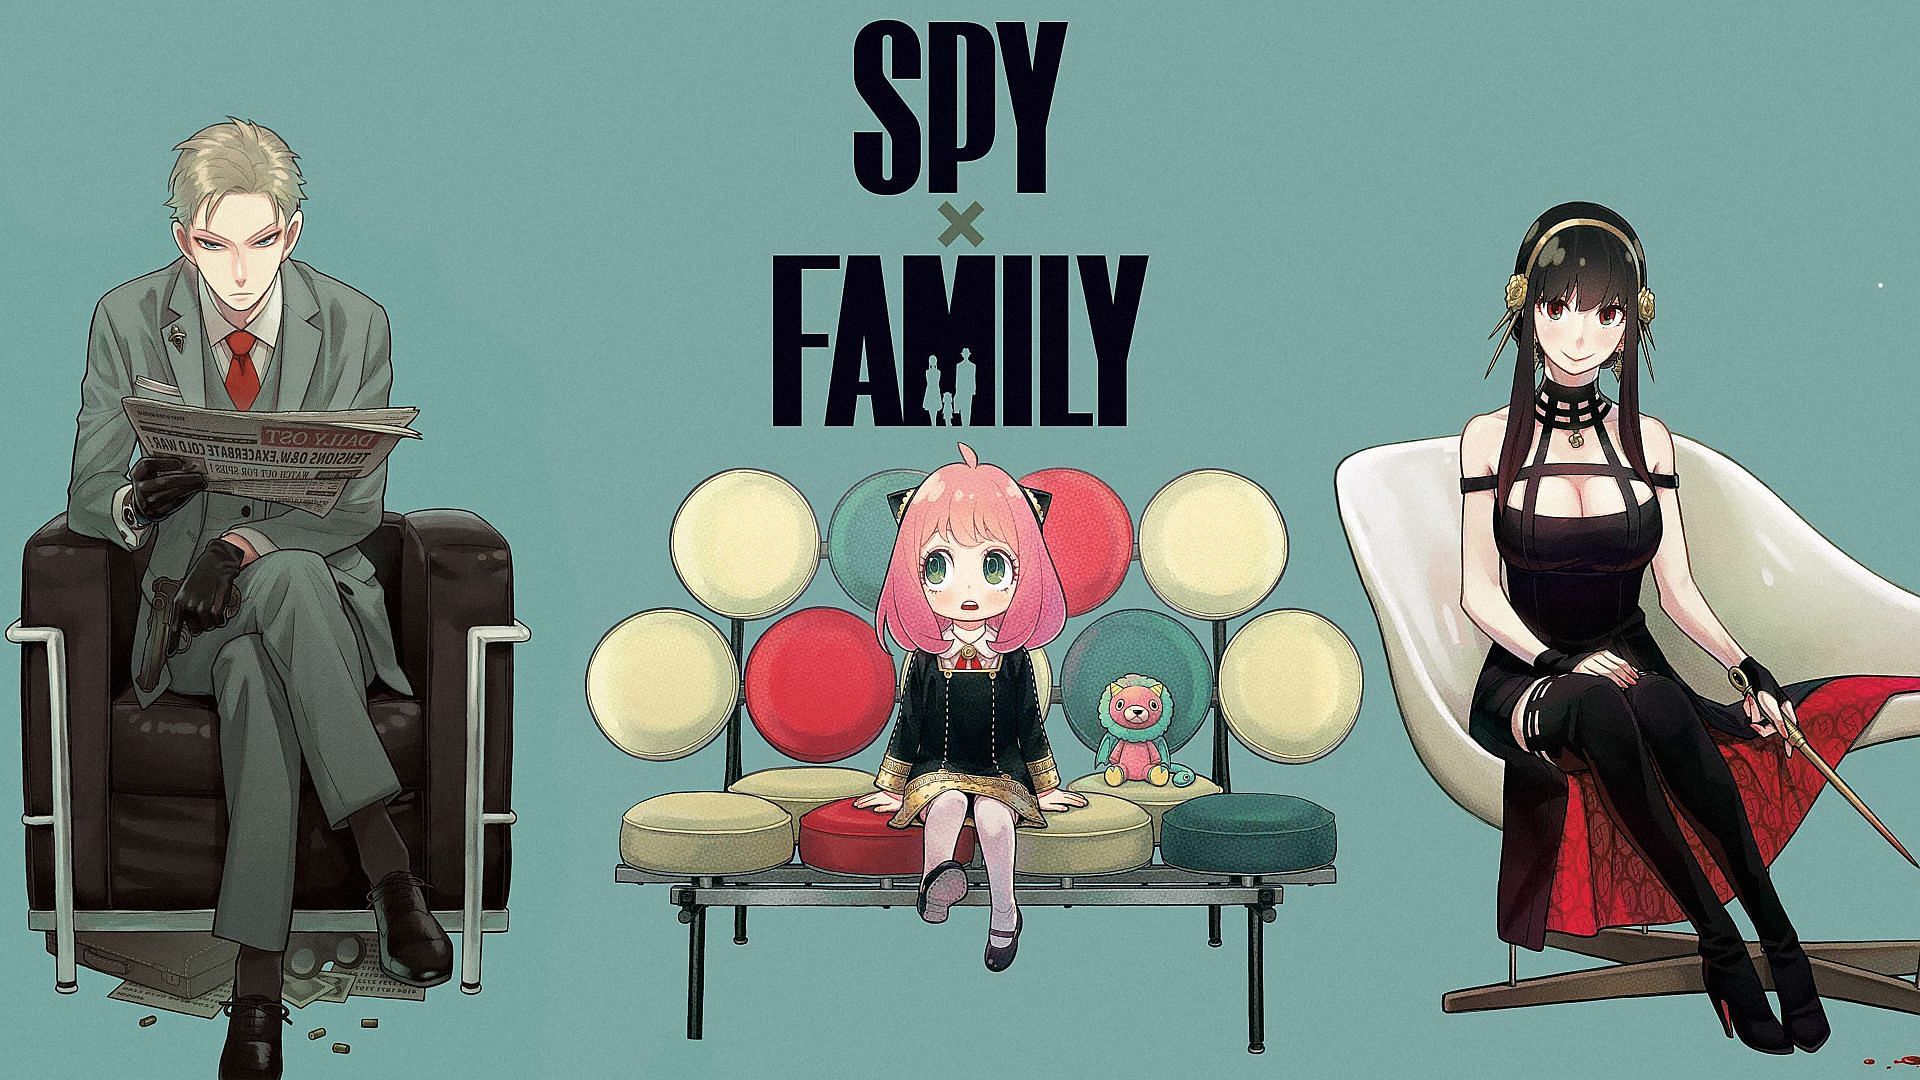 Where Can I Watch 'Spy X Family?'